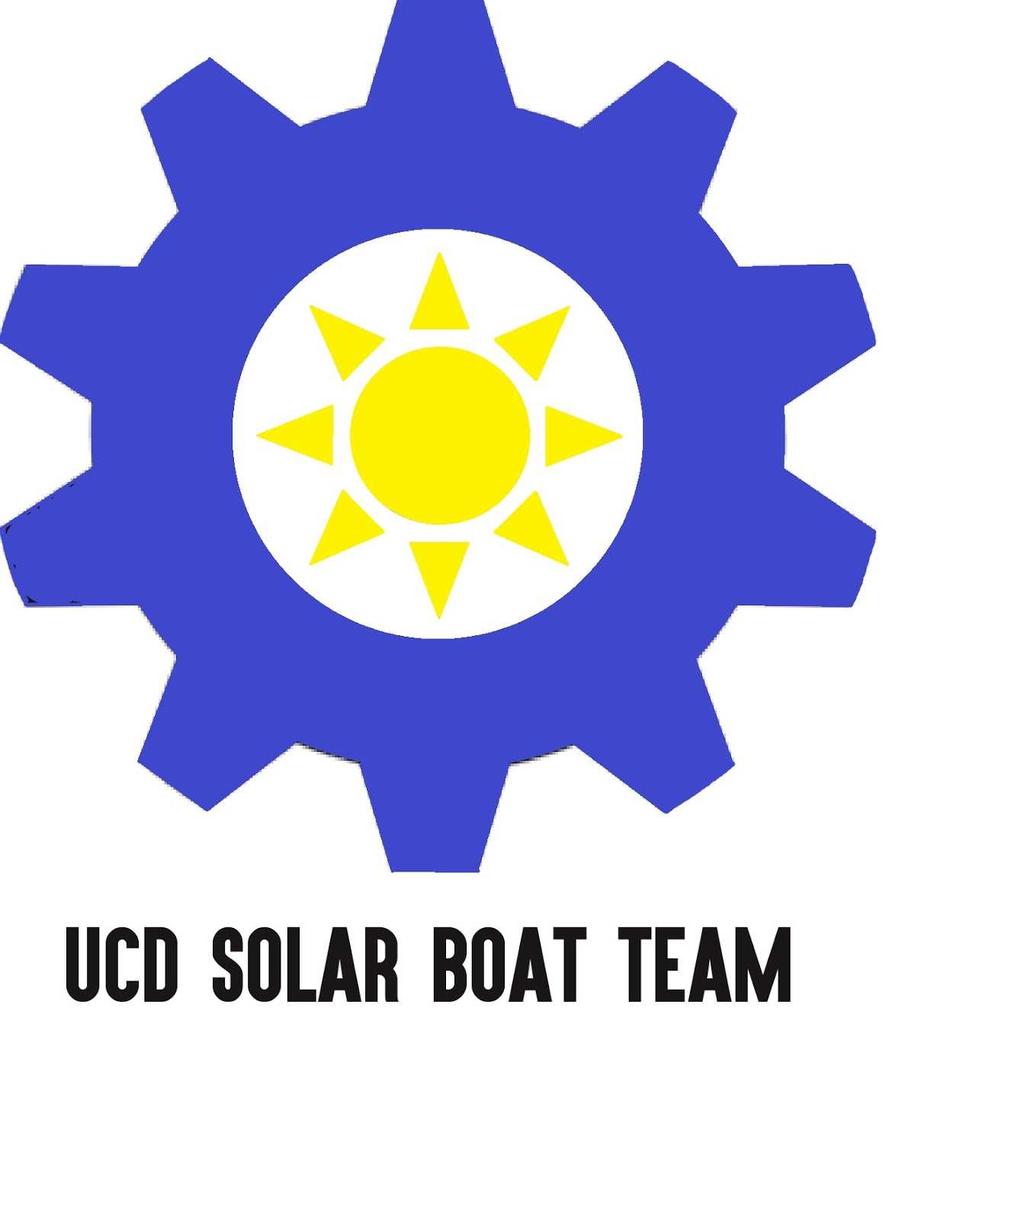 On Saturday, May 5th, the Solar Boat Team at UC Davis competed at the seventh annual California Solar Regatta.